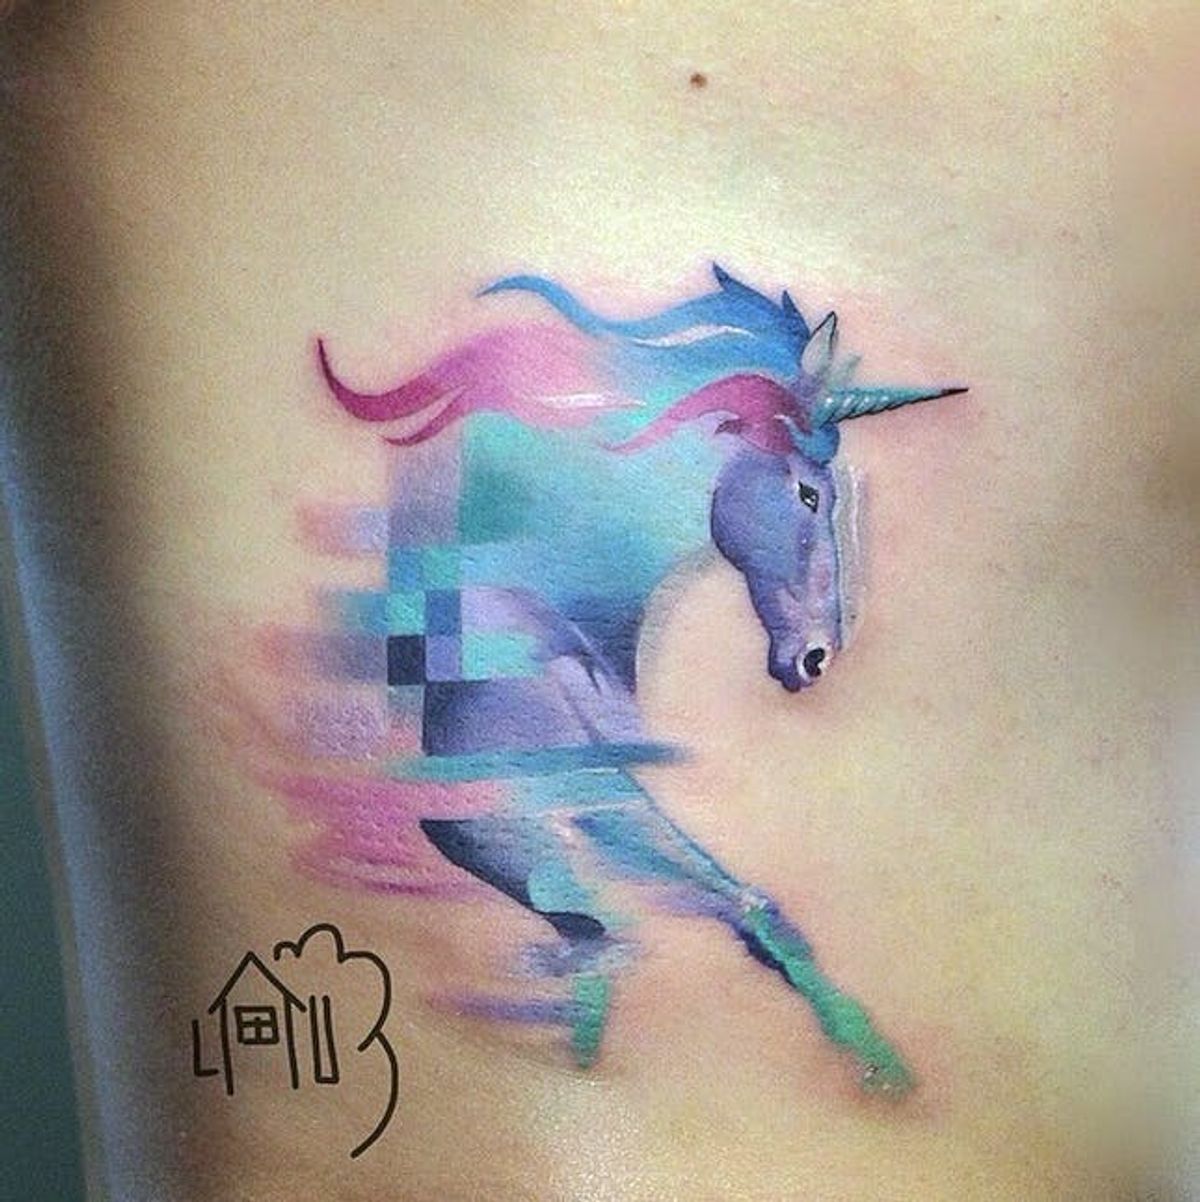 This Tattoo Artist Incorporates Pixels into His Beautiful Designs